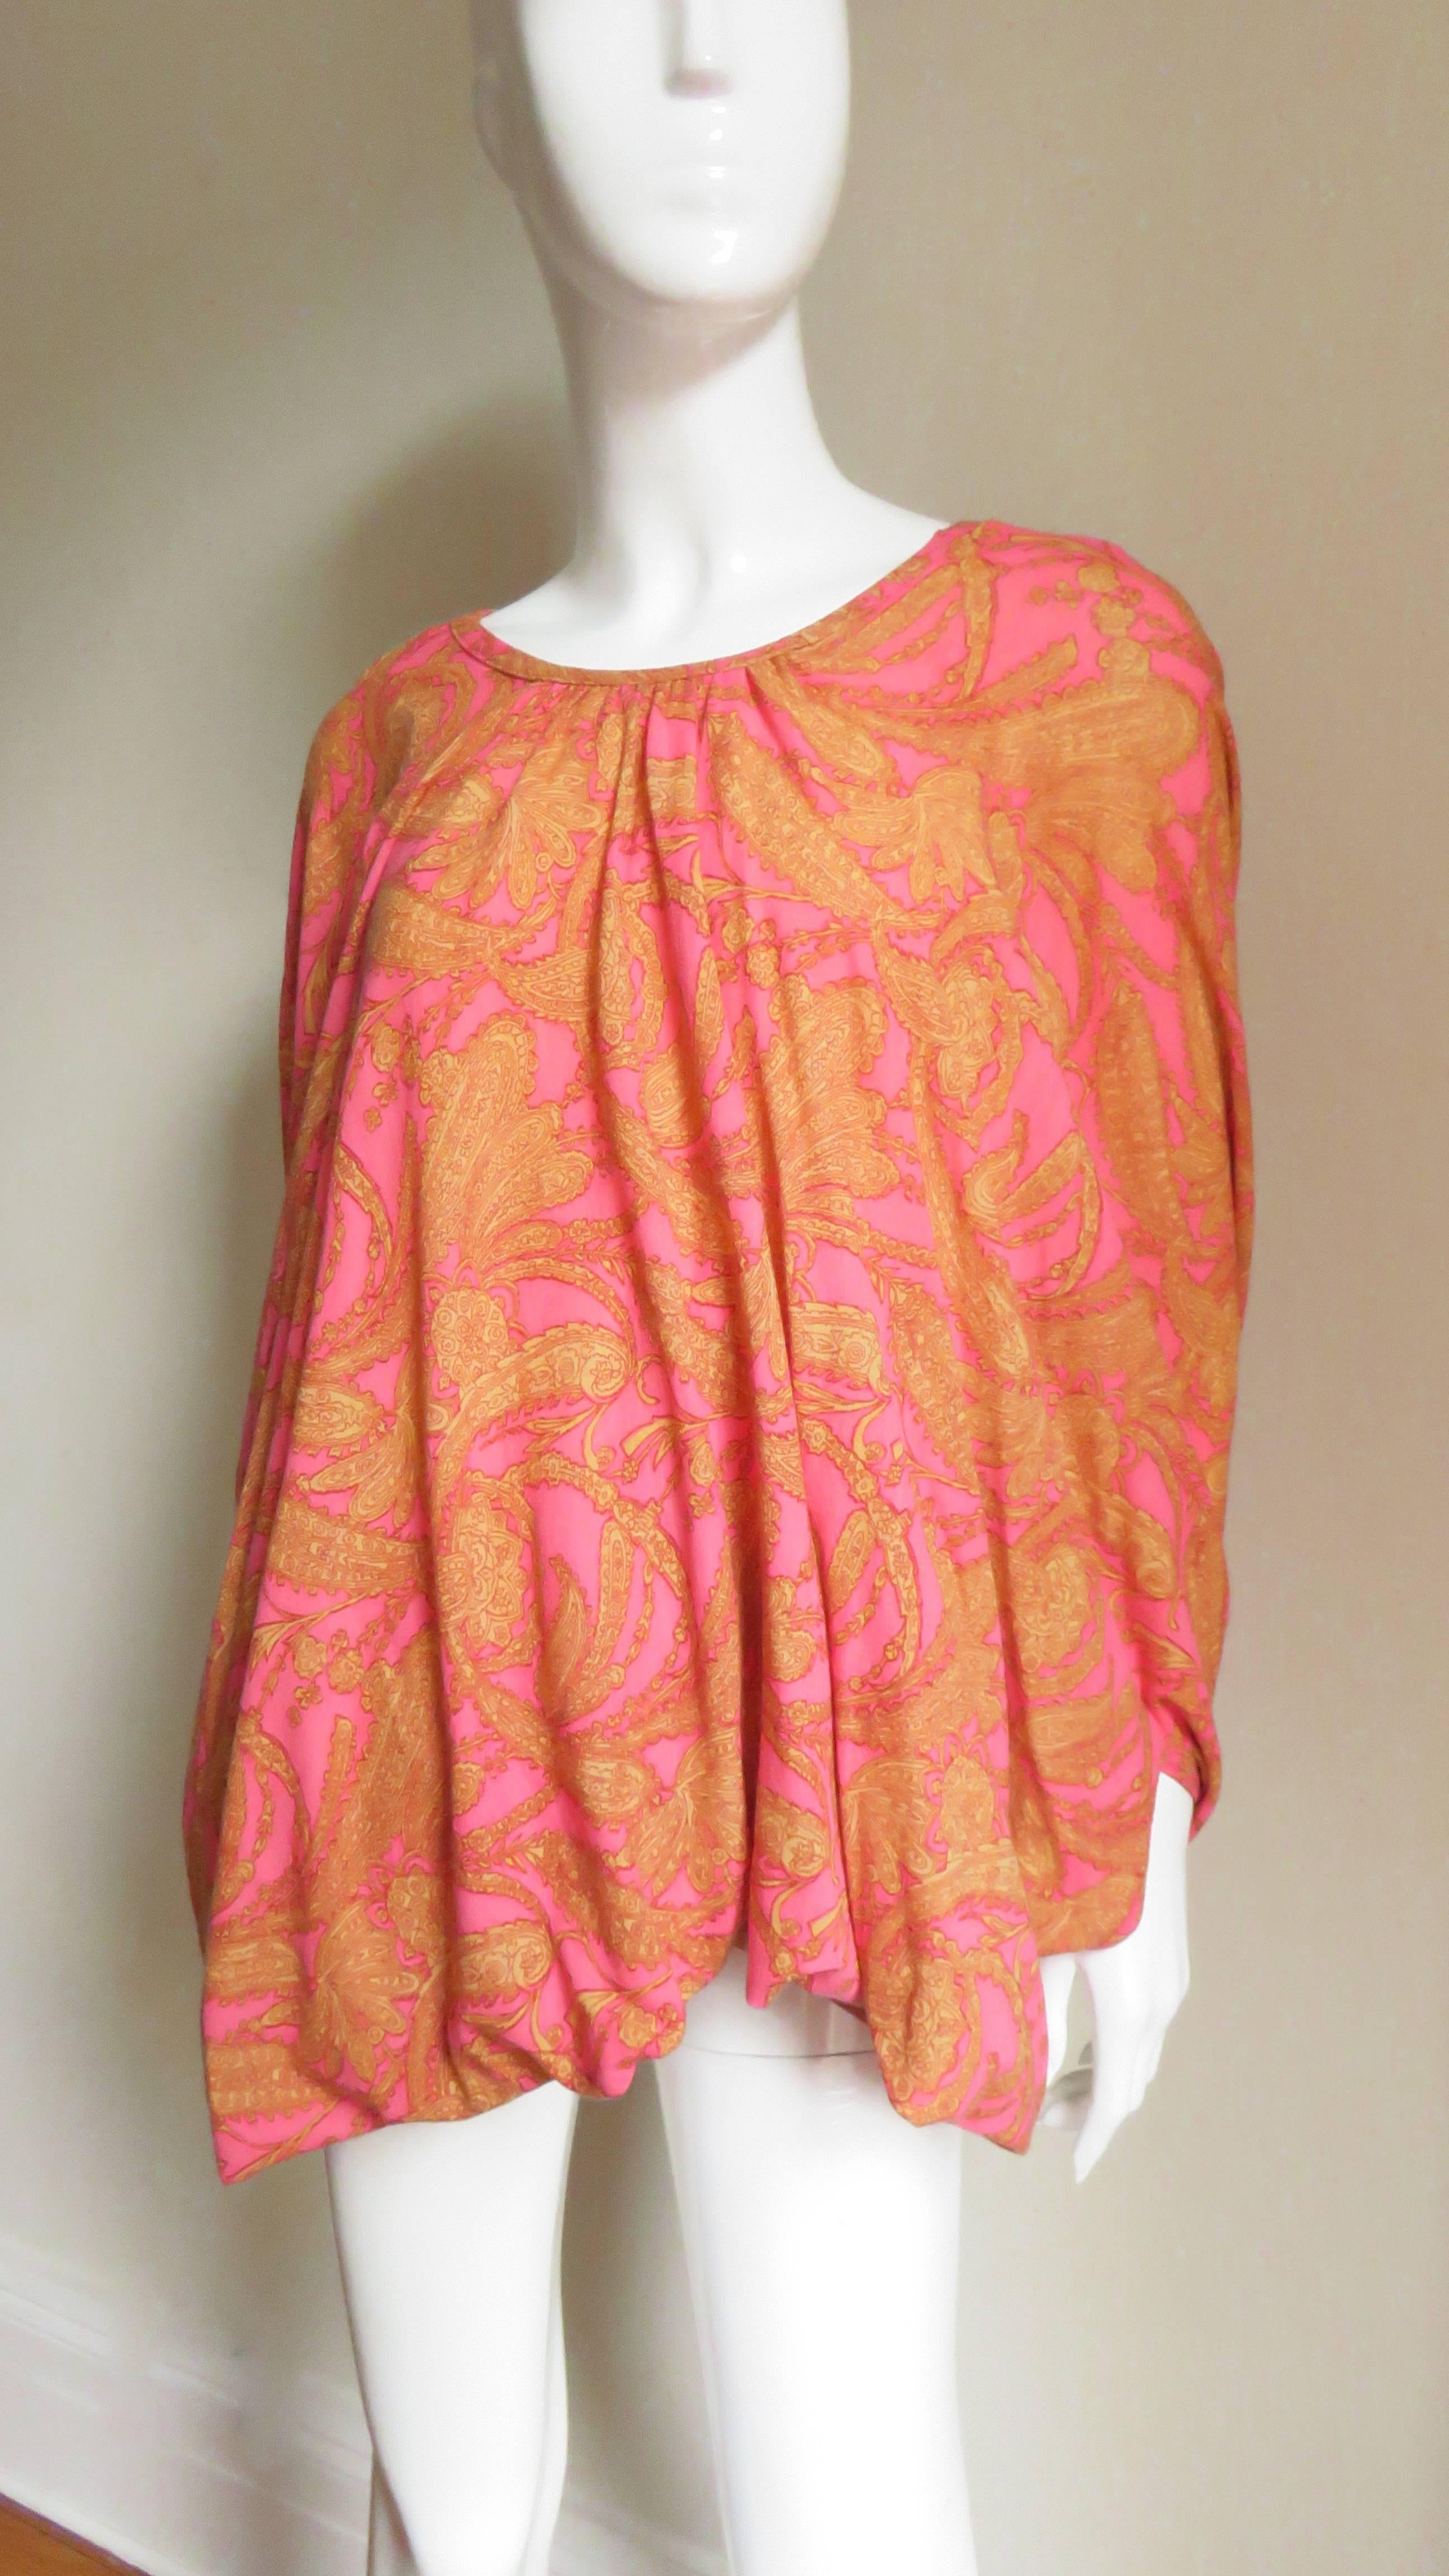 A fabulous fine light weight jersey top in a pink and yellow paisley pattern from Comme des Garcons, CDG.  The top is comprised of draping from the crew neckline to the band at the hem.  There are 2 side openings mid way on the sides for the arms. 